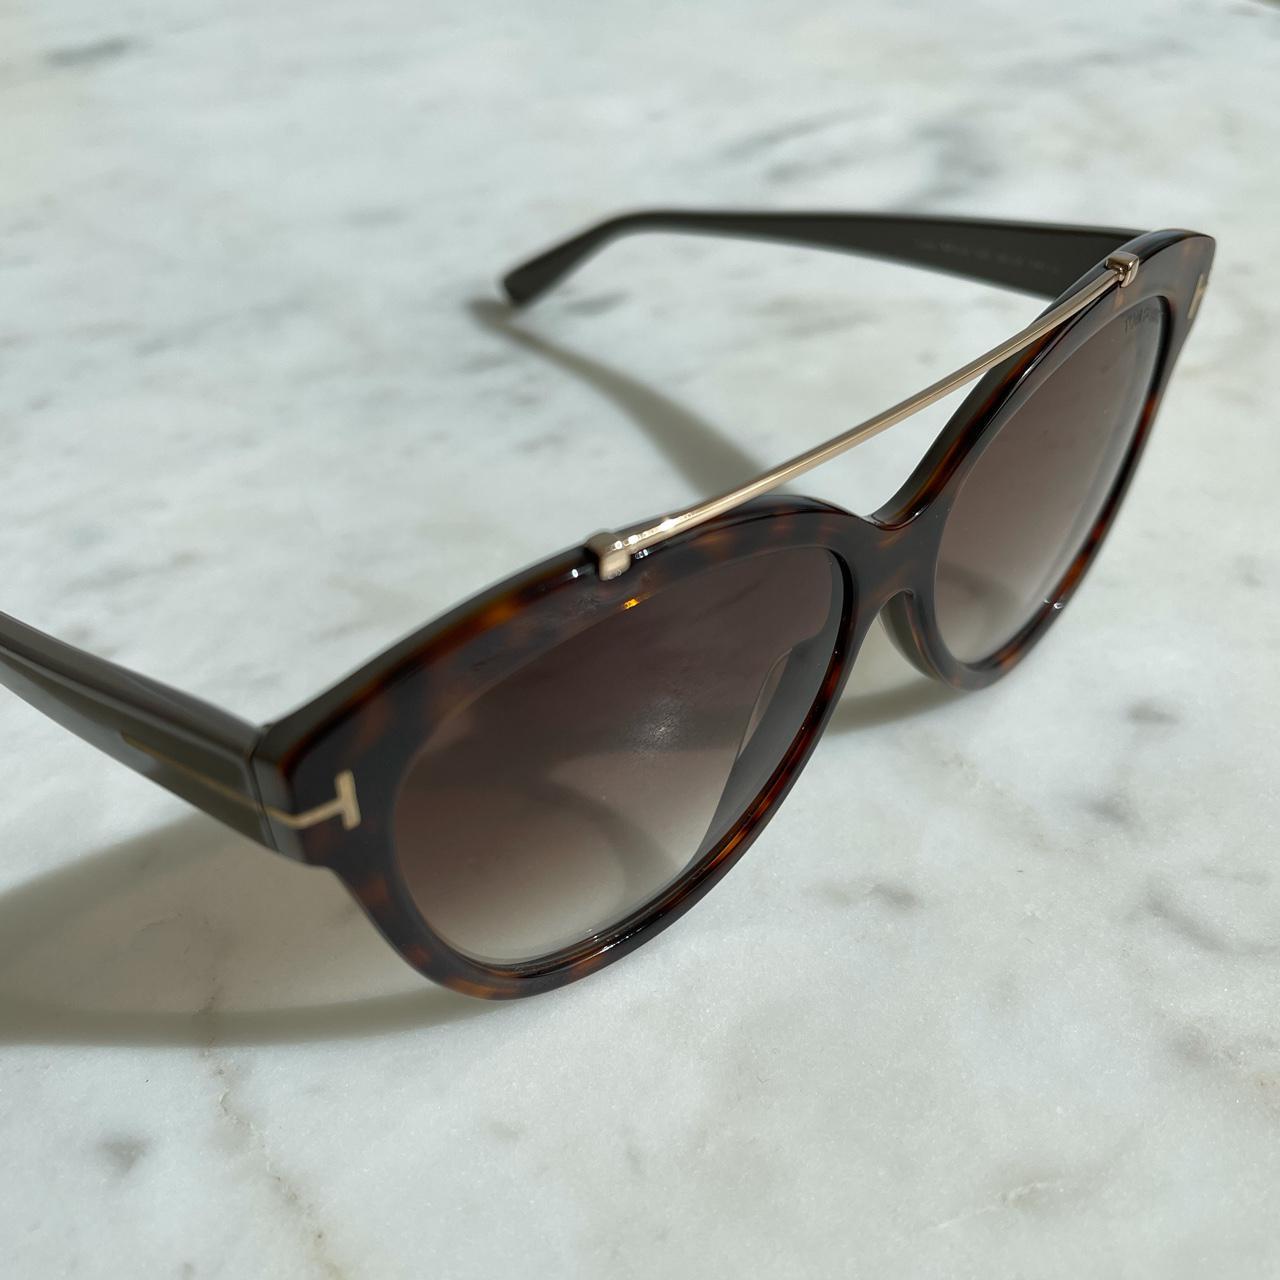 TOM FORD Women's Brown and Tan Sunglasses